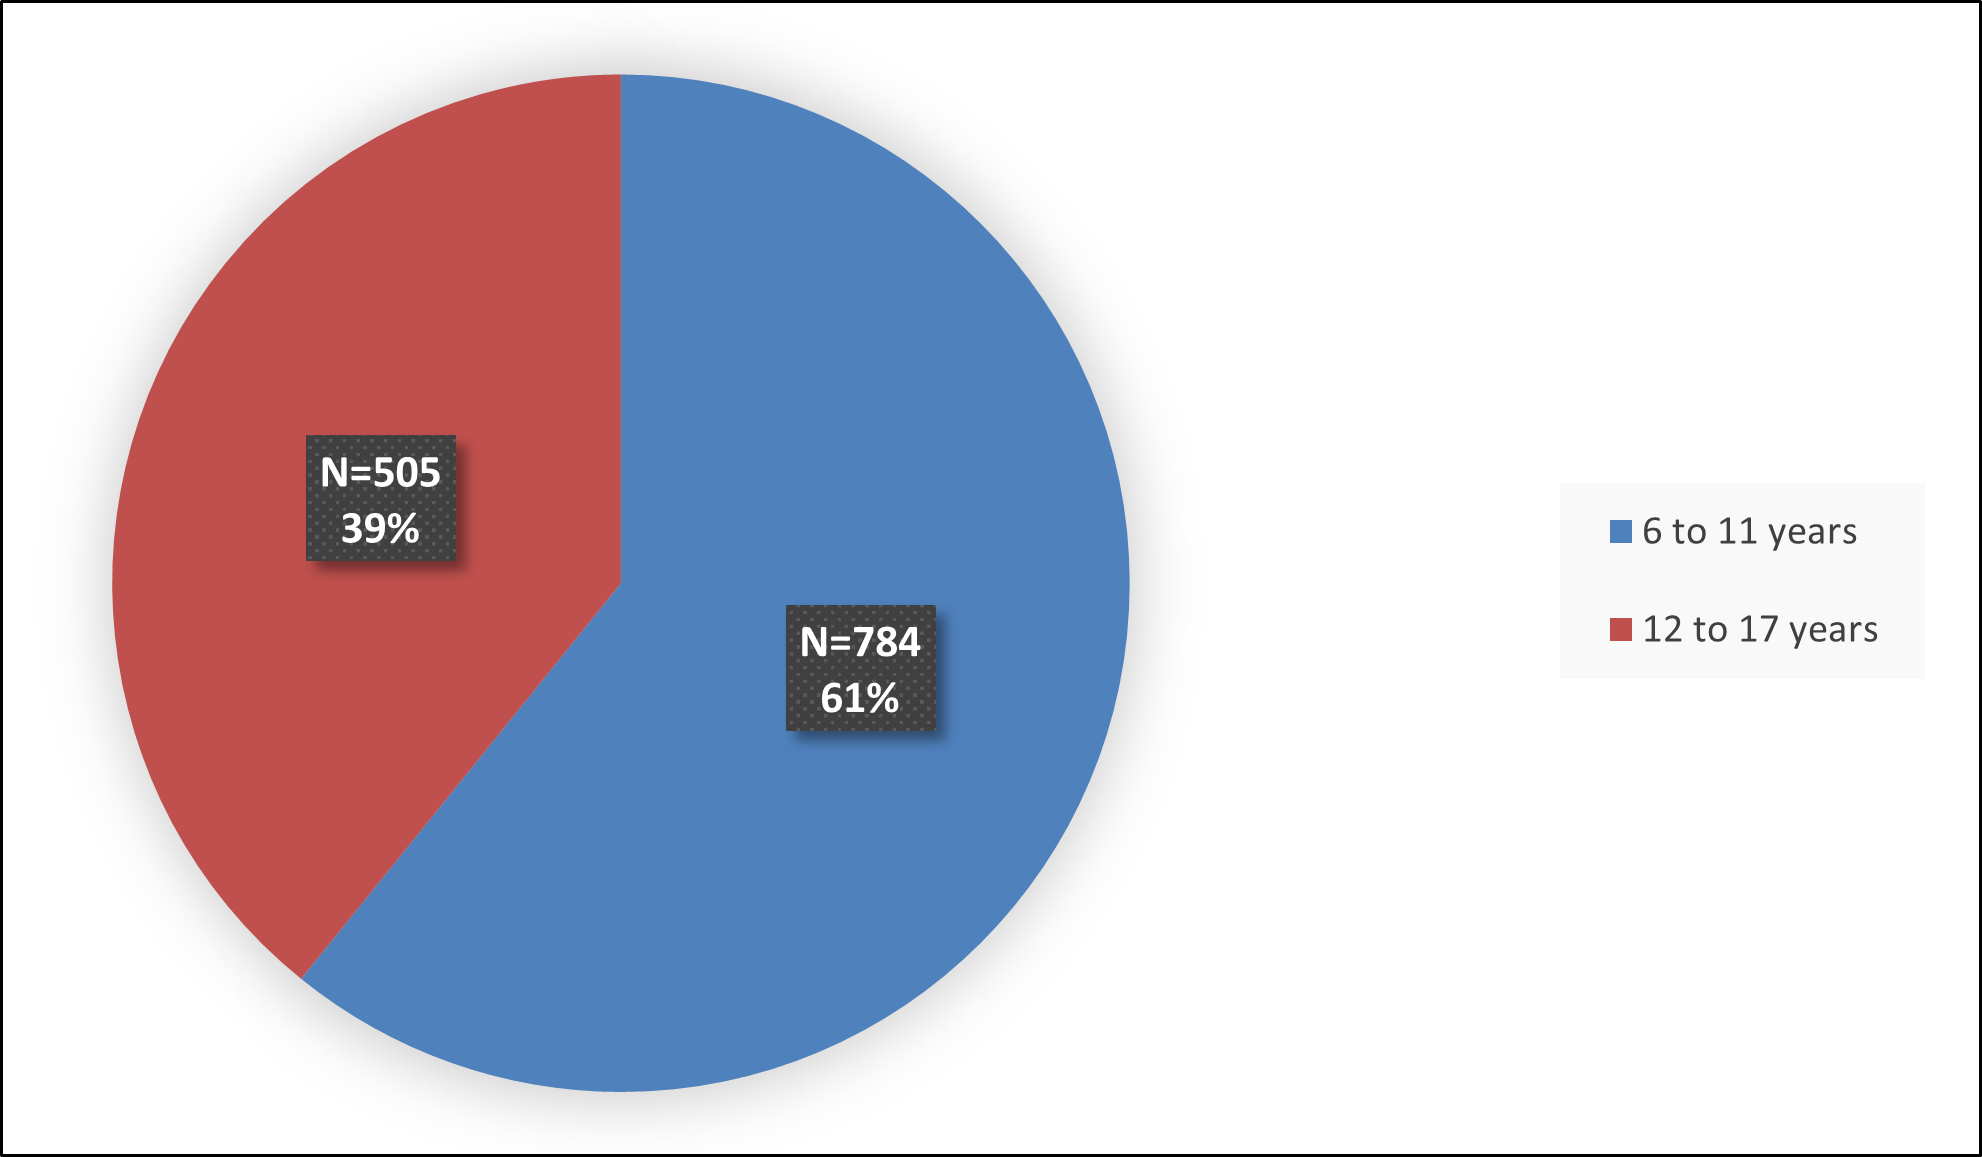 Figure 6 is a pie chart summarizes how many patients by age were in the combined trials (Studies 1, 2, and 3, and a PK study) used to evaluate the side effects of QELBREE.